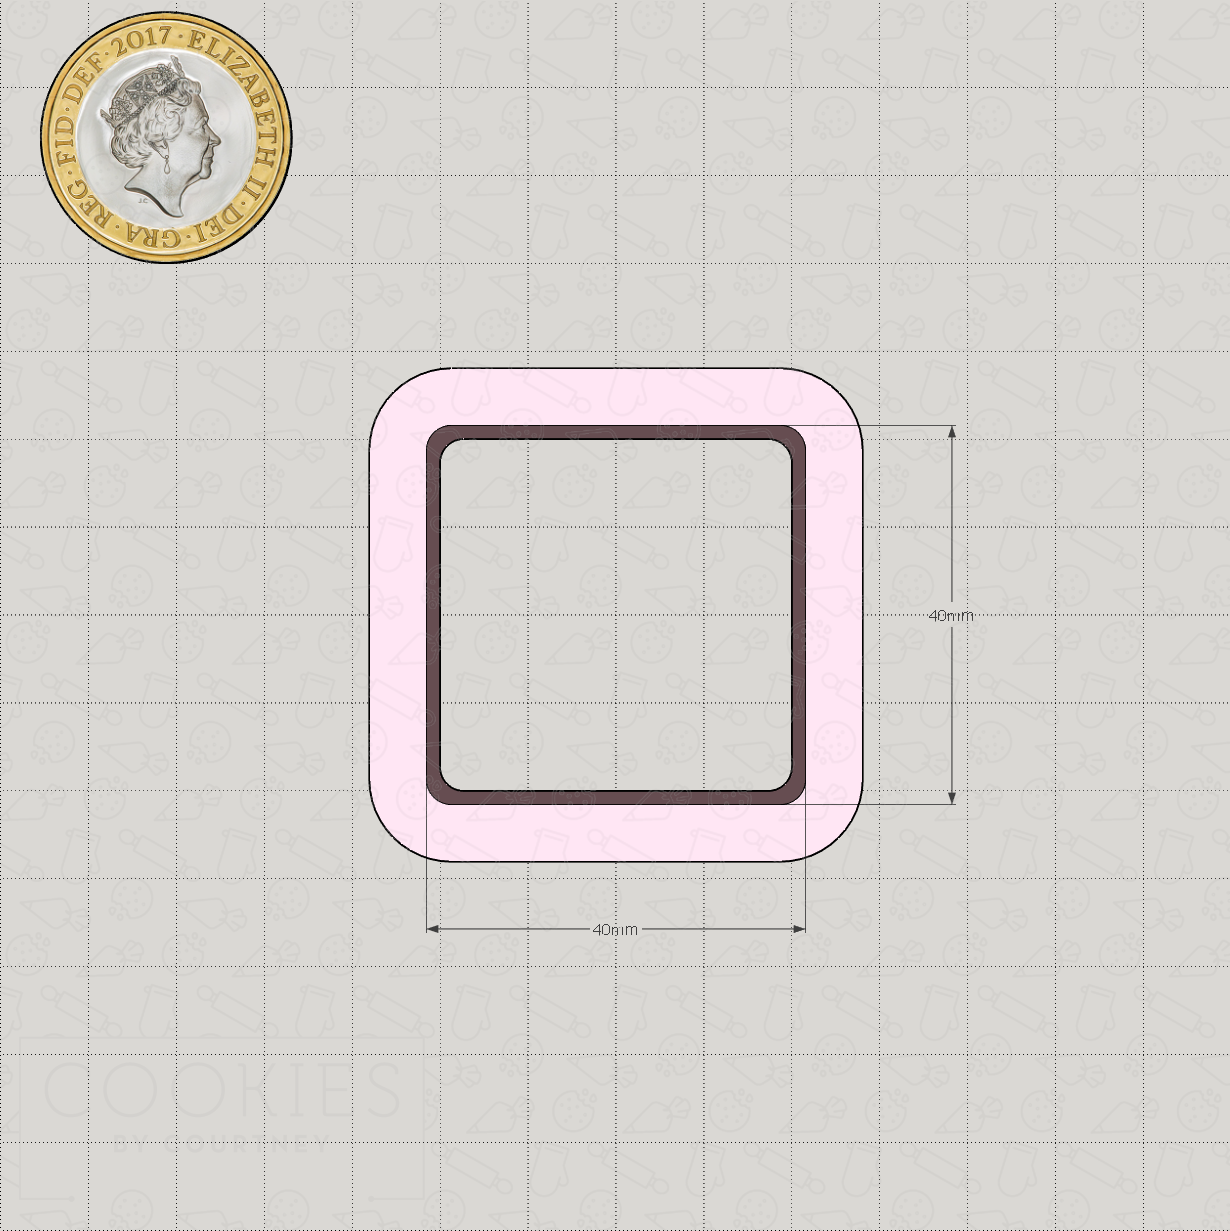 Basic Shapes - Square - Rounded Corners - Cookie Cutter